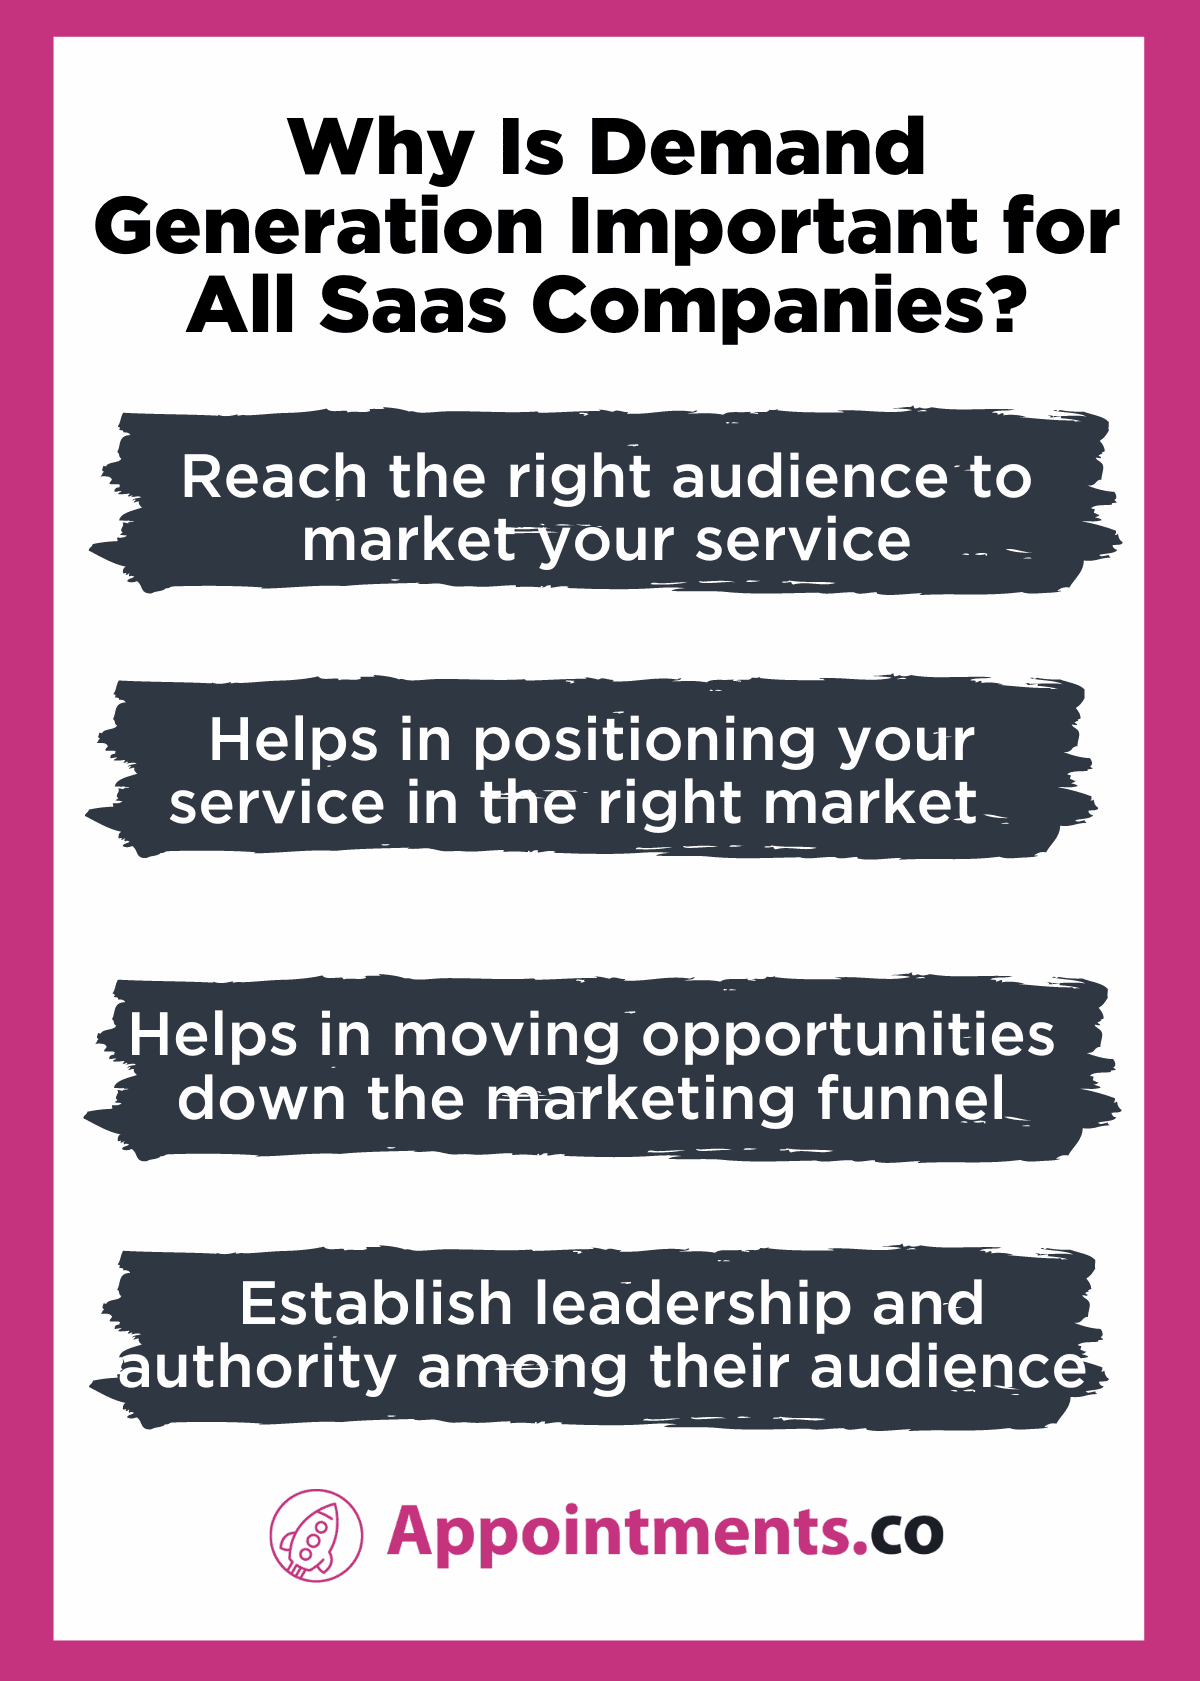 Why Is Demand Generation Important for All Saas Companies?